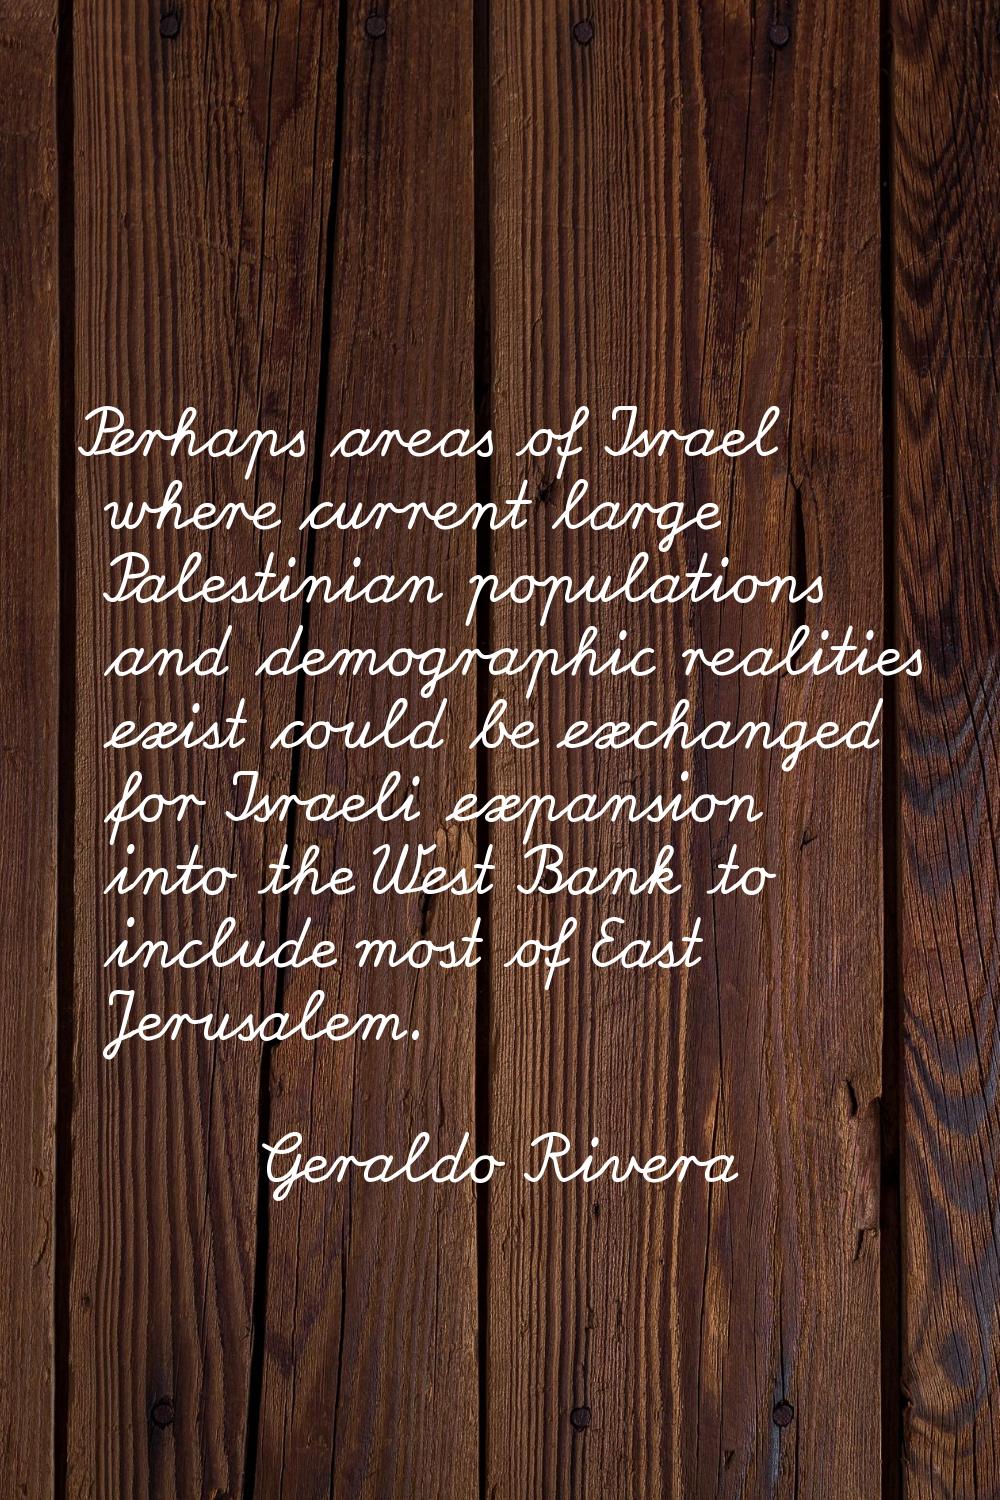 Perhaps areas of Israel where current large Palestinian populations and demographic realities exist